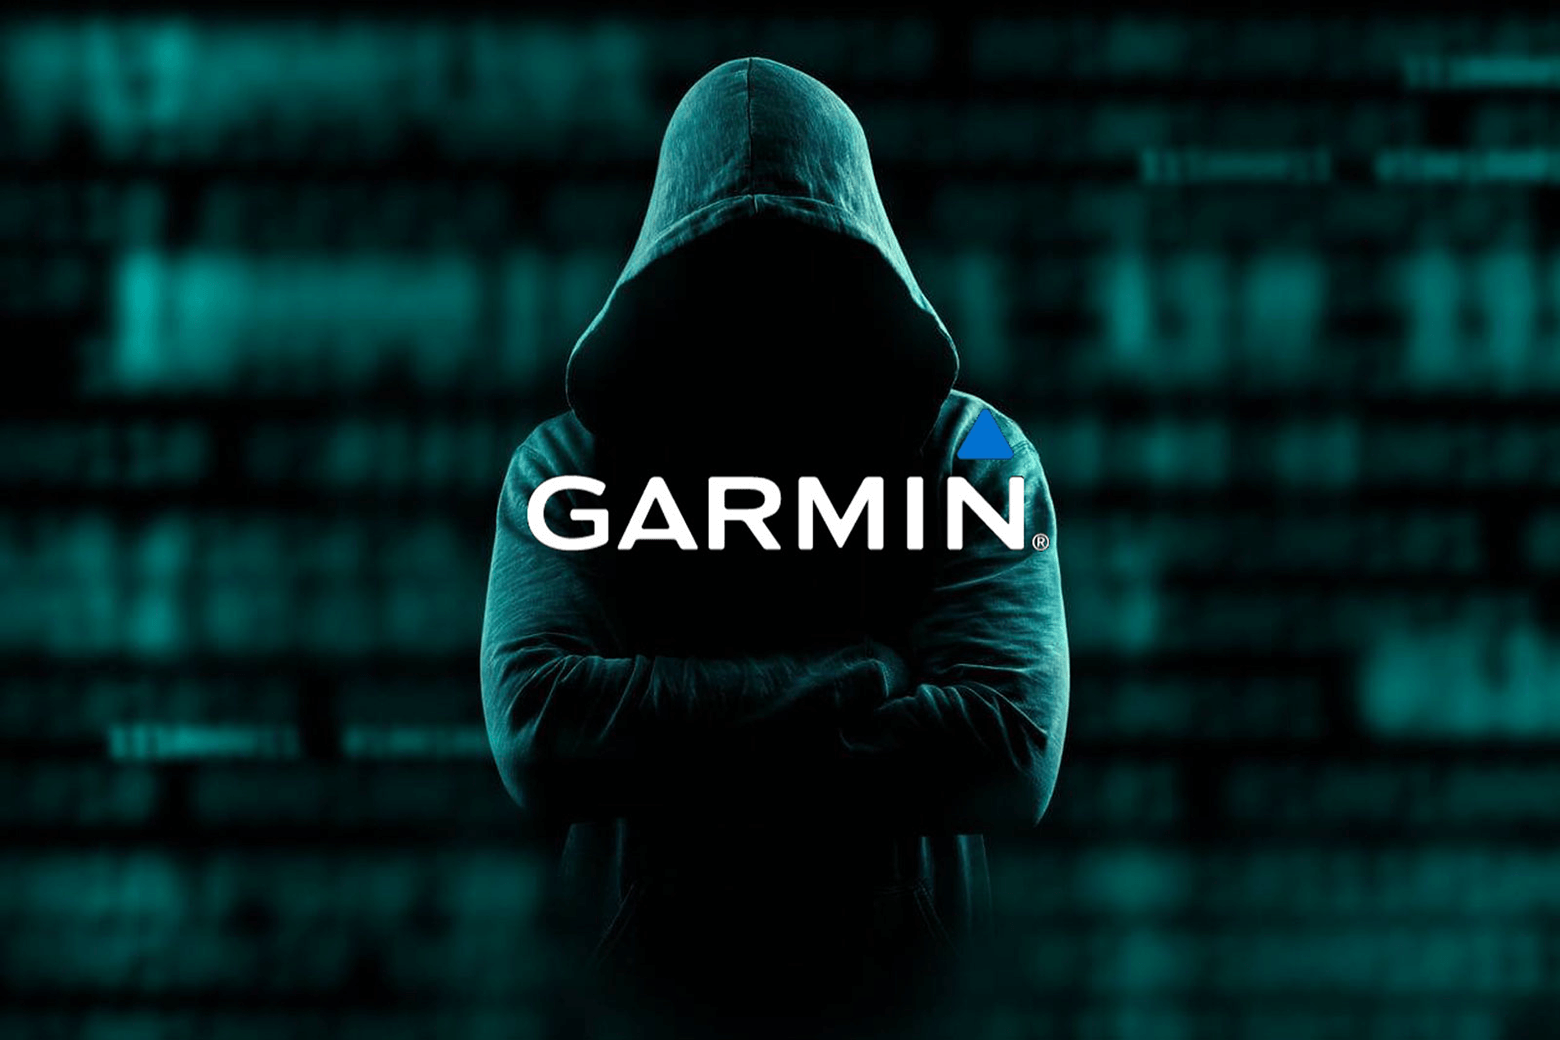 Lessons Learned from the Garmin Ransomware Attack 